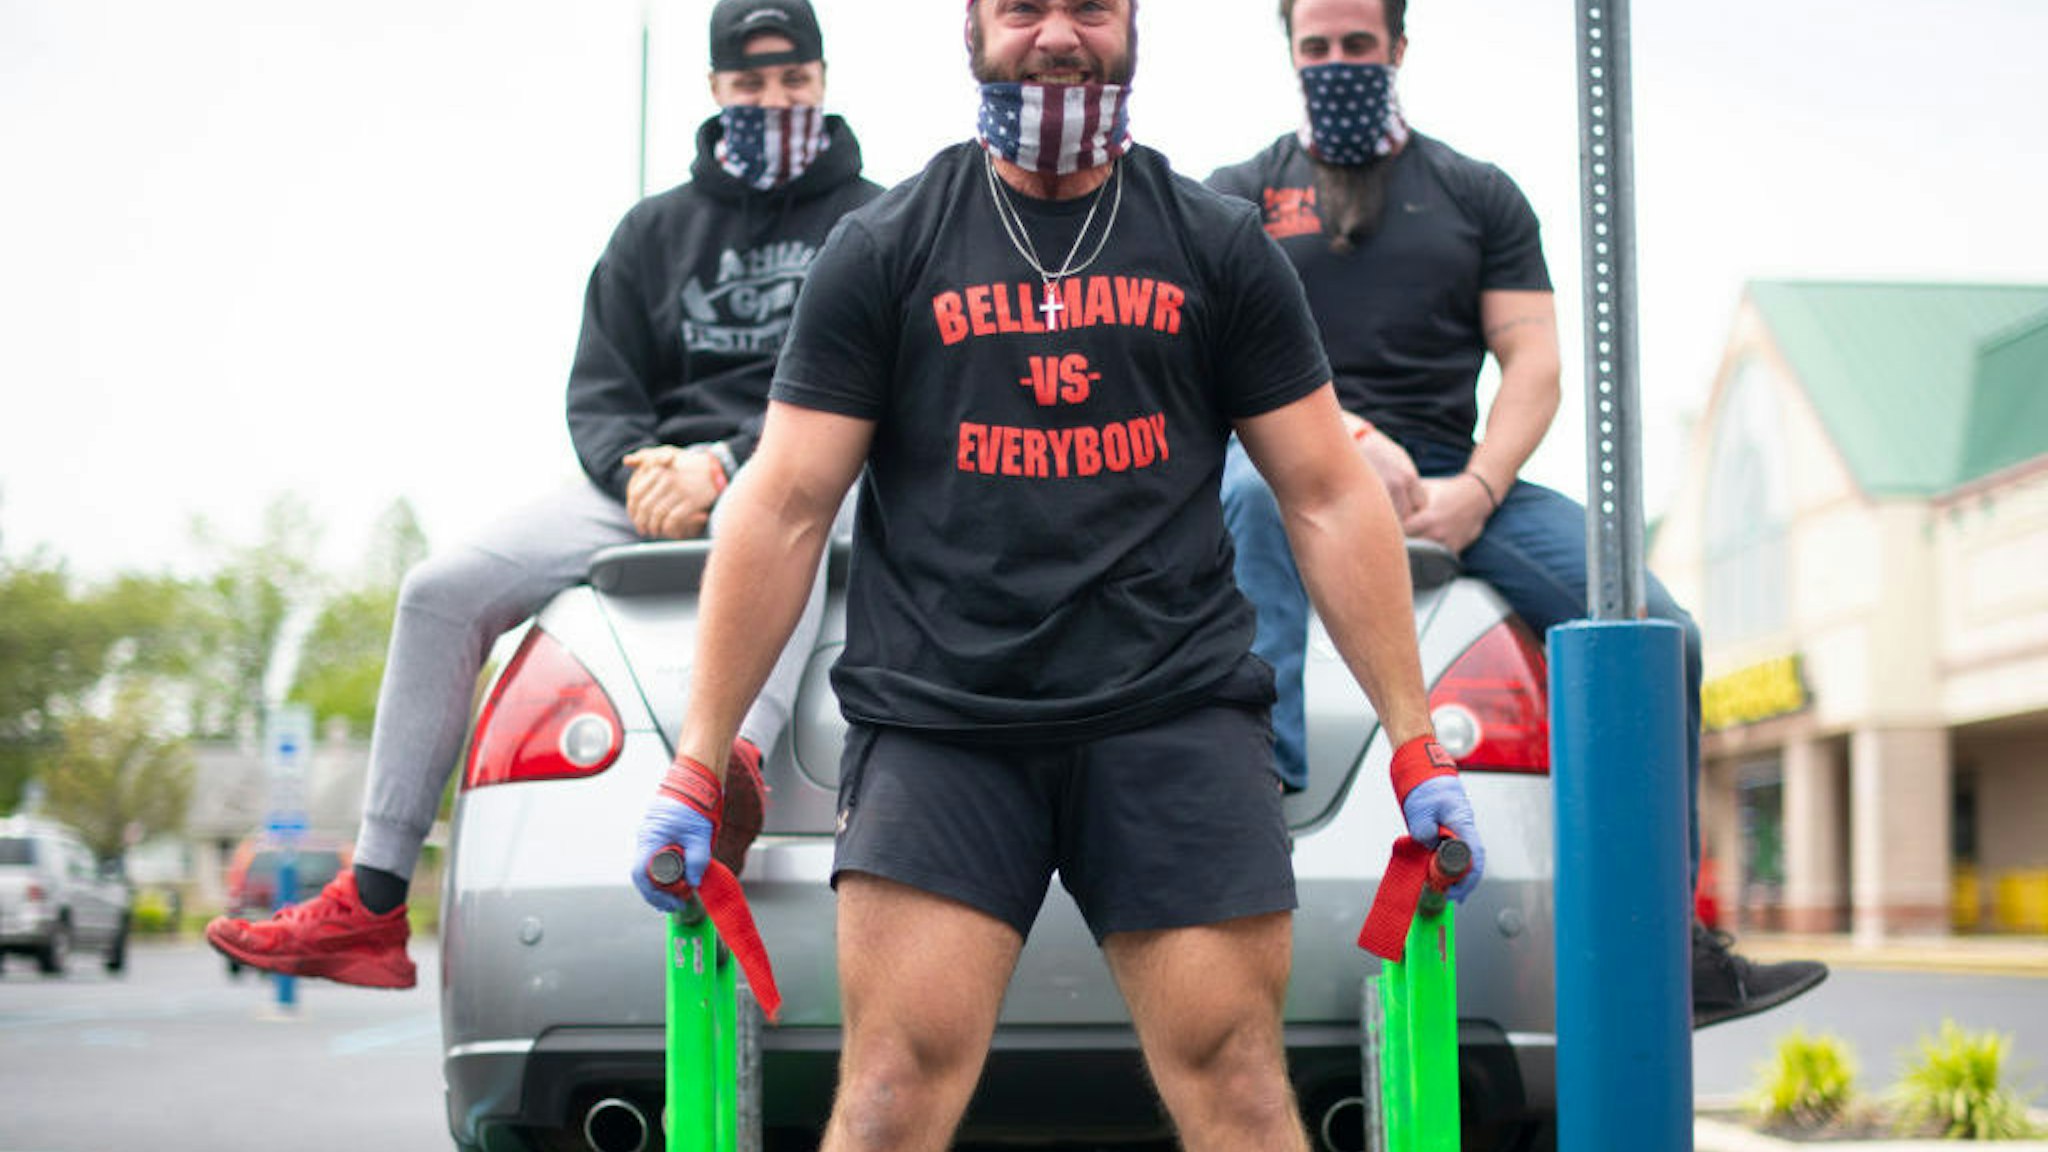 BELLMAWR, NJ - MAY 20: A body builder lifts a car and two men in the parking lot outside the Atilis Gym on May 20, 2020 in Bellmawr, New Jersey. The gym has opened for the third consecutive day, defying the New Jersey Governor's mandate that many retail businesses stay closed due to the coronavirus pandemic. (Photo by Mark Makela/Getty Images)